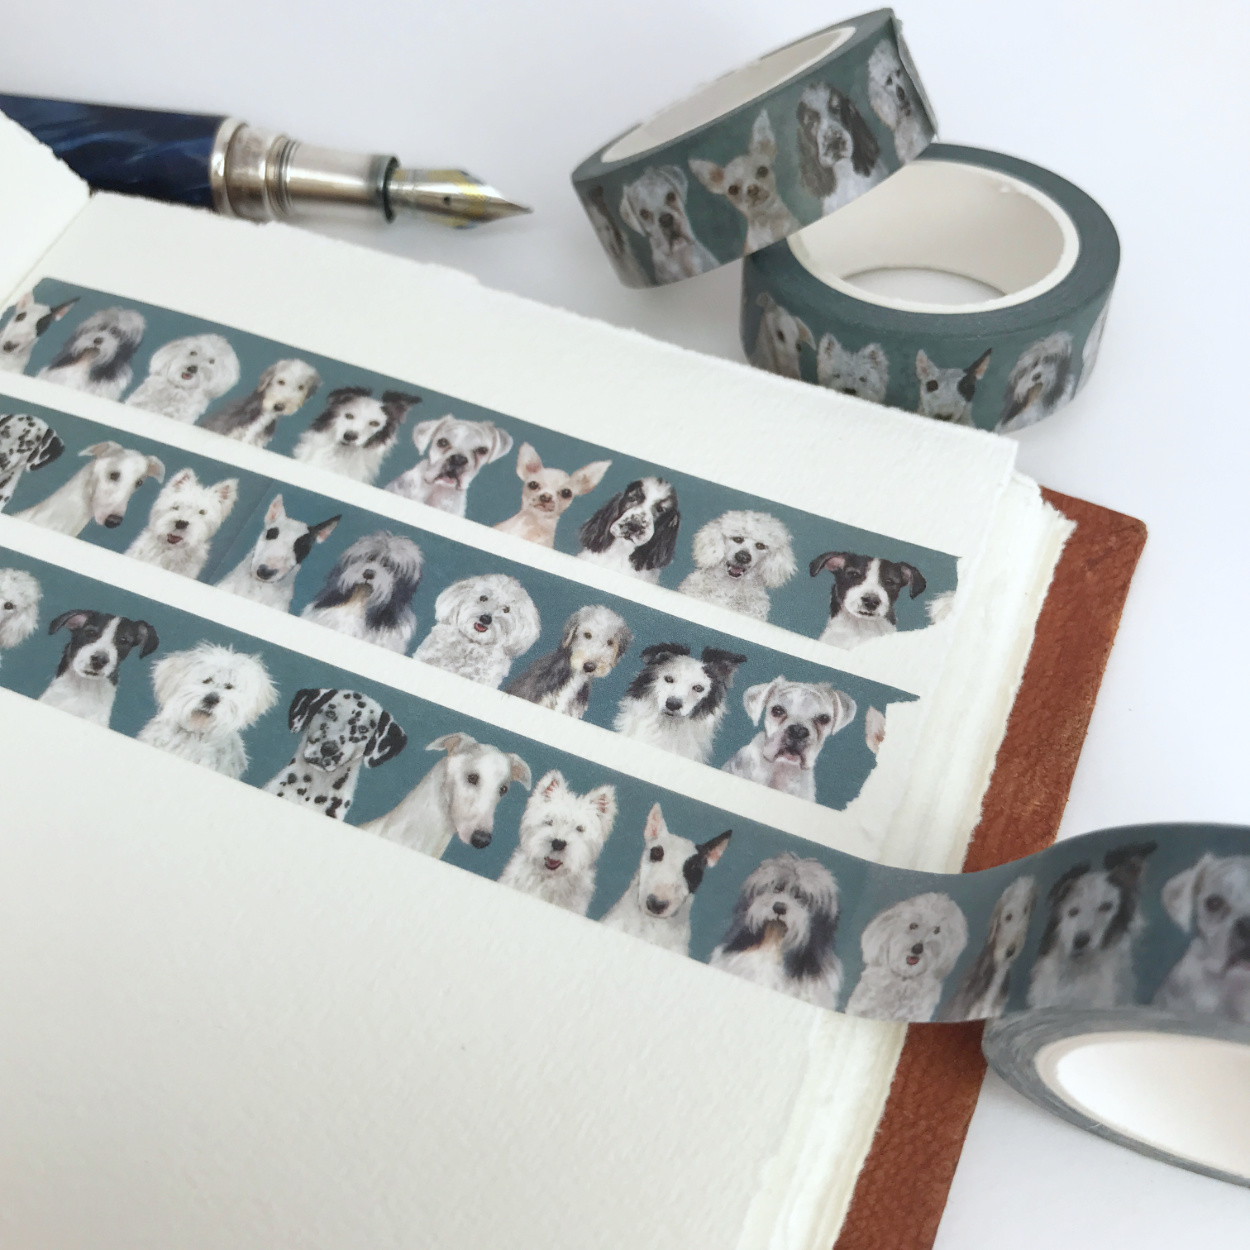 Black and White Dog Breeds Washi Tape Journal | The Enlightened Hound